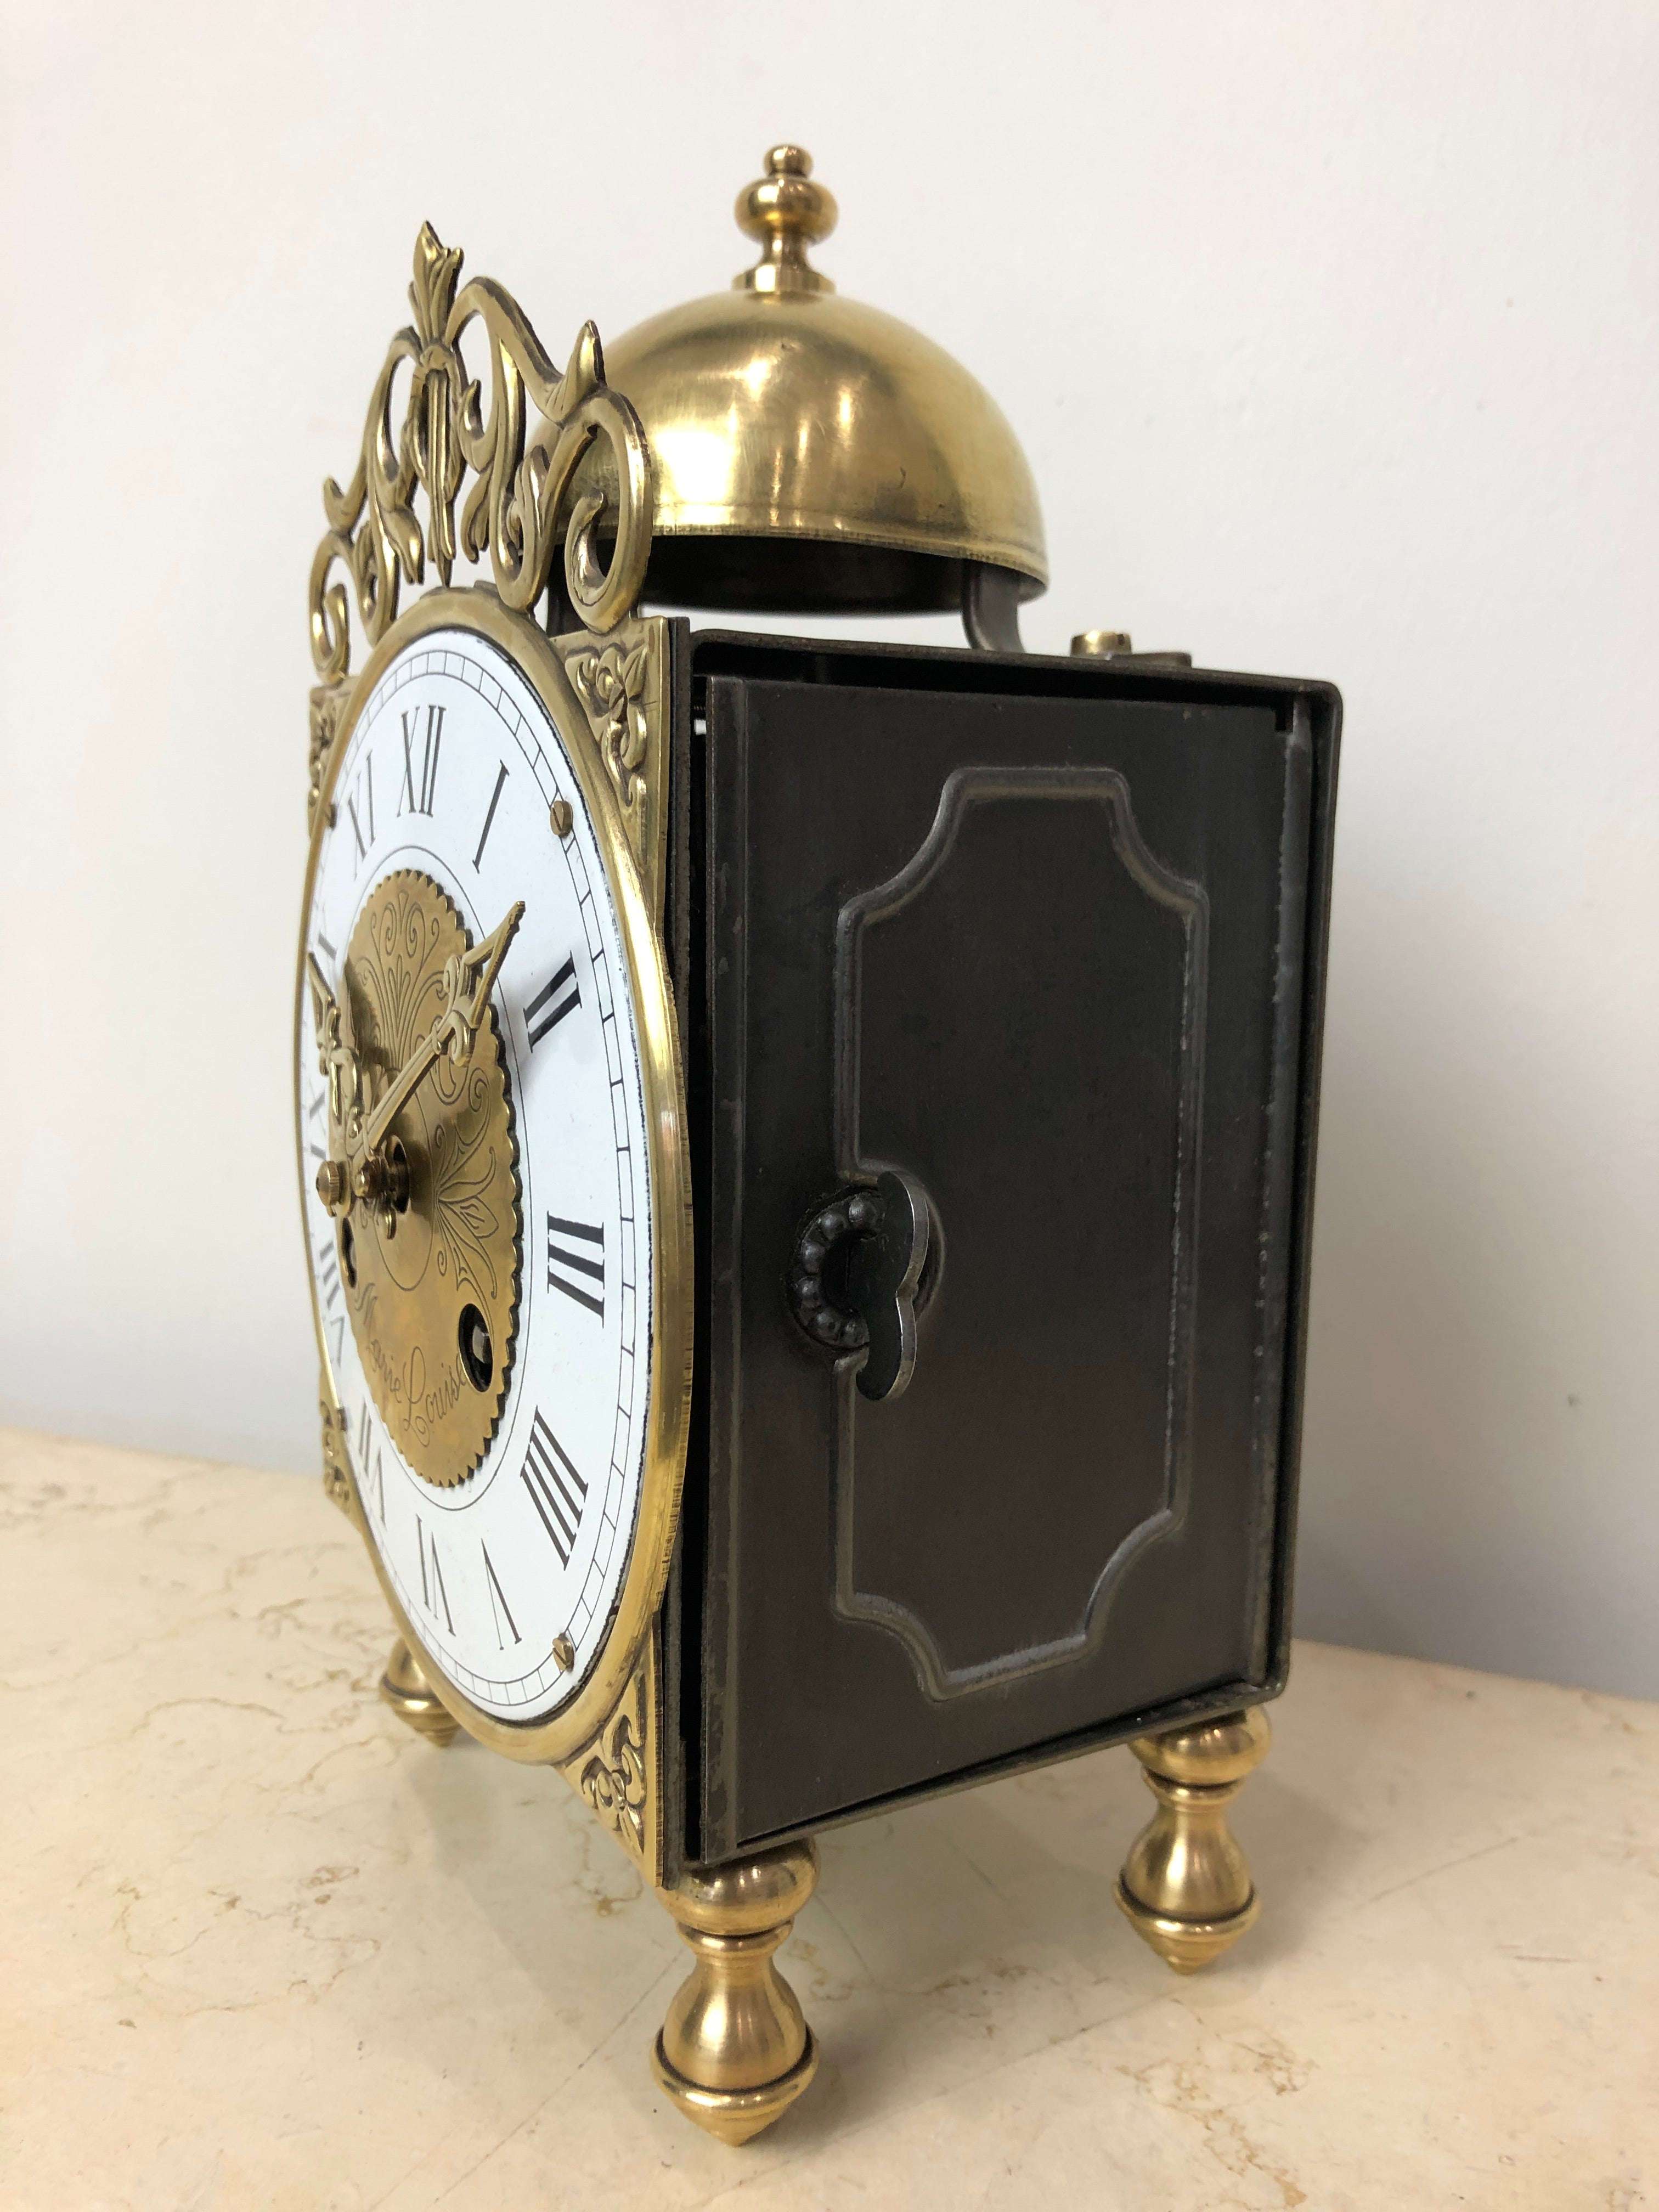 Vintage FRANZ Hermle Marie Louise Brass Bell Chime Mantel Clock | eXibit collection